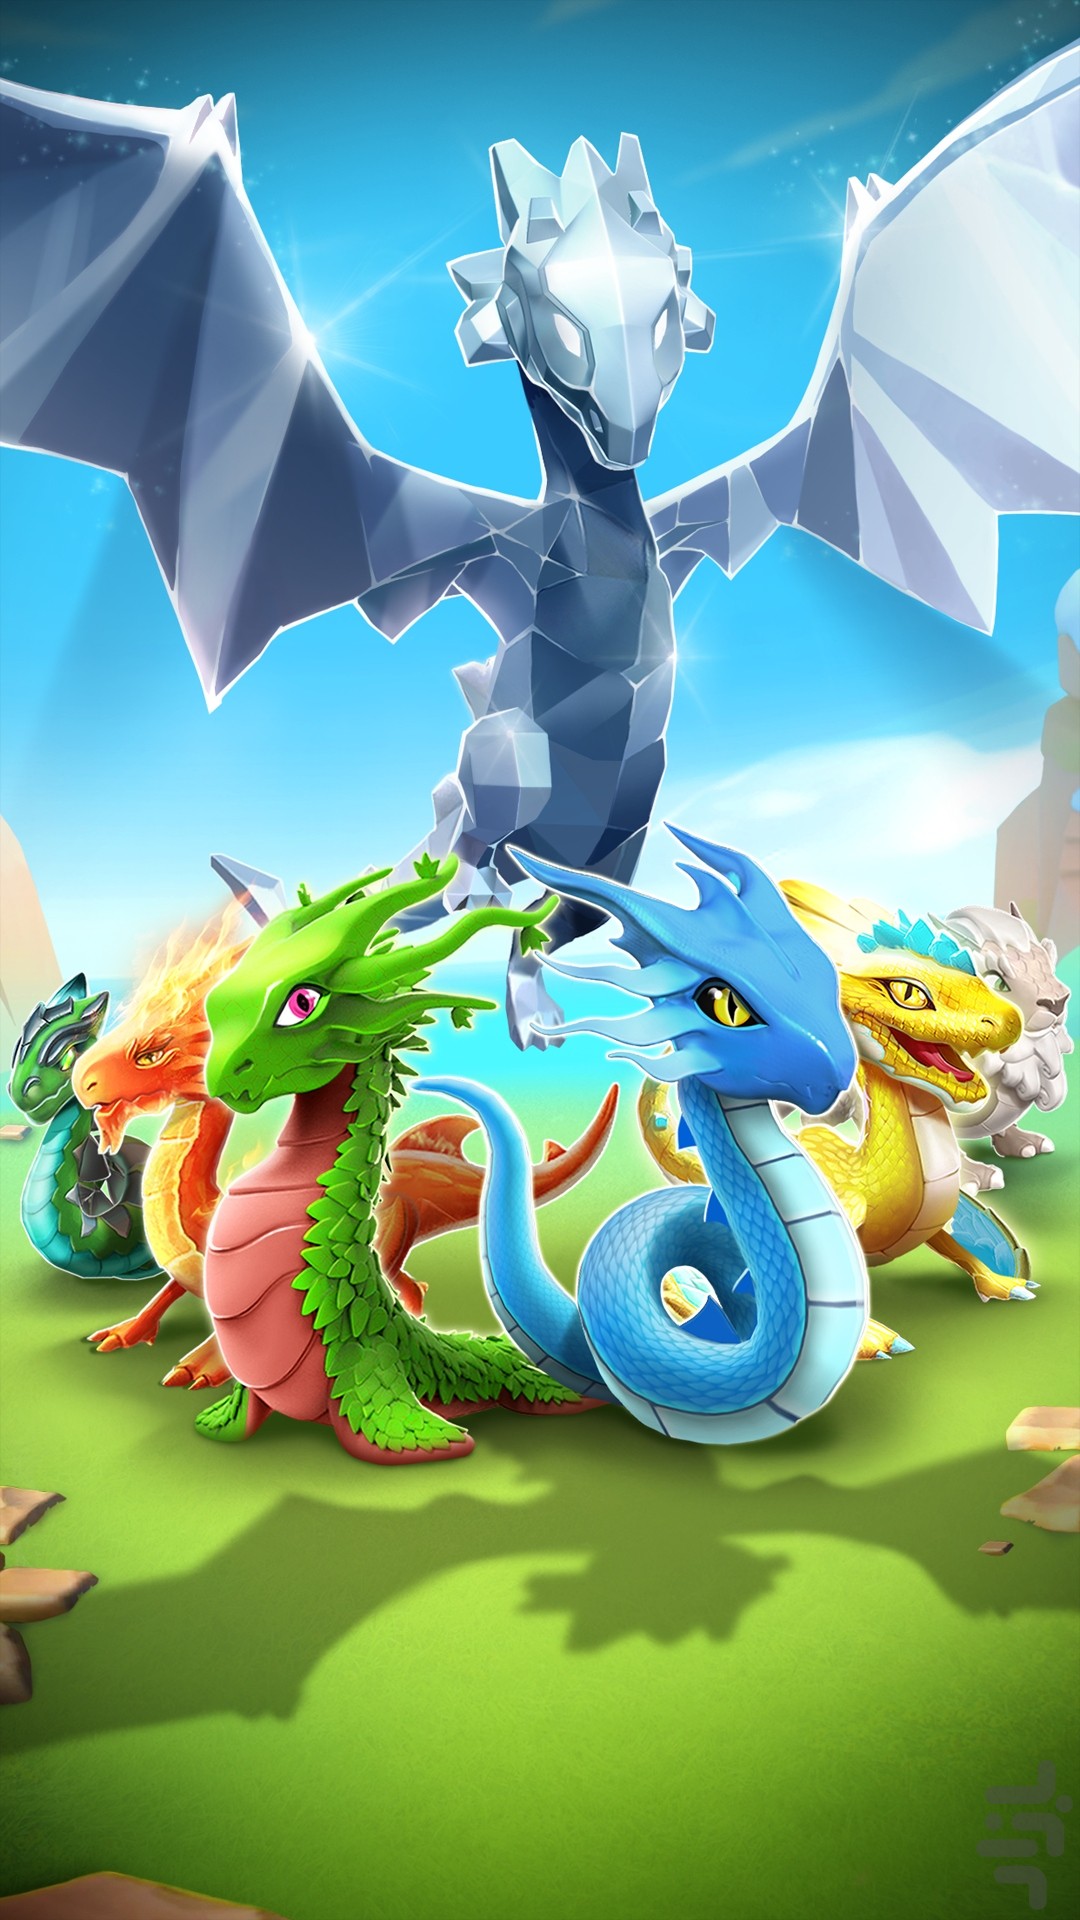 on dragon mania legends, which dragons do i breed to get a mercury dragon